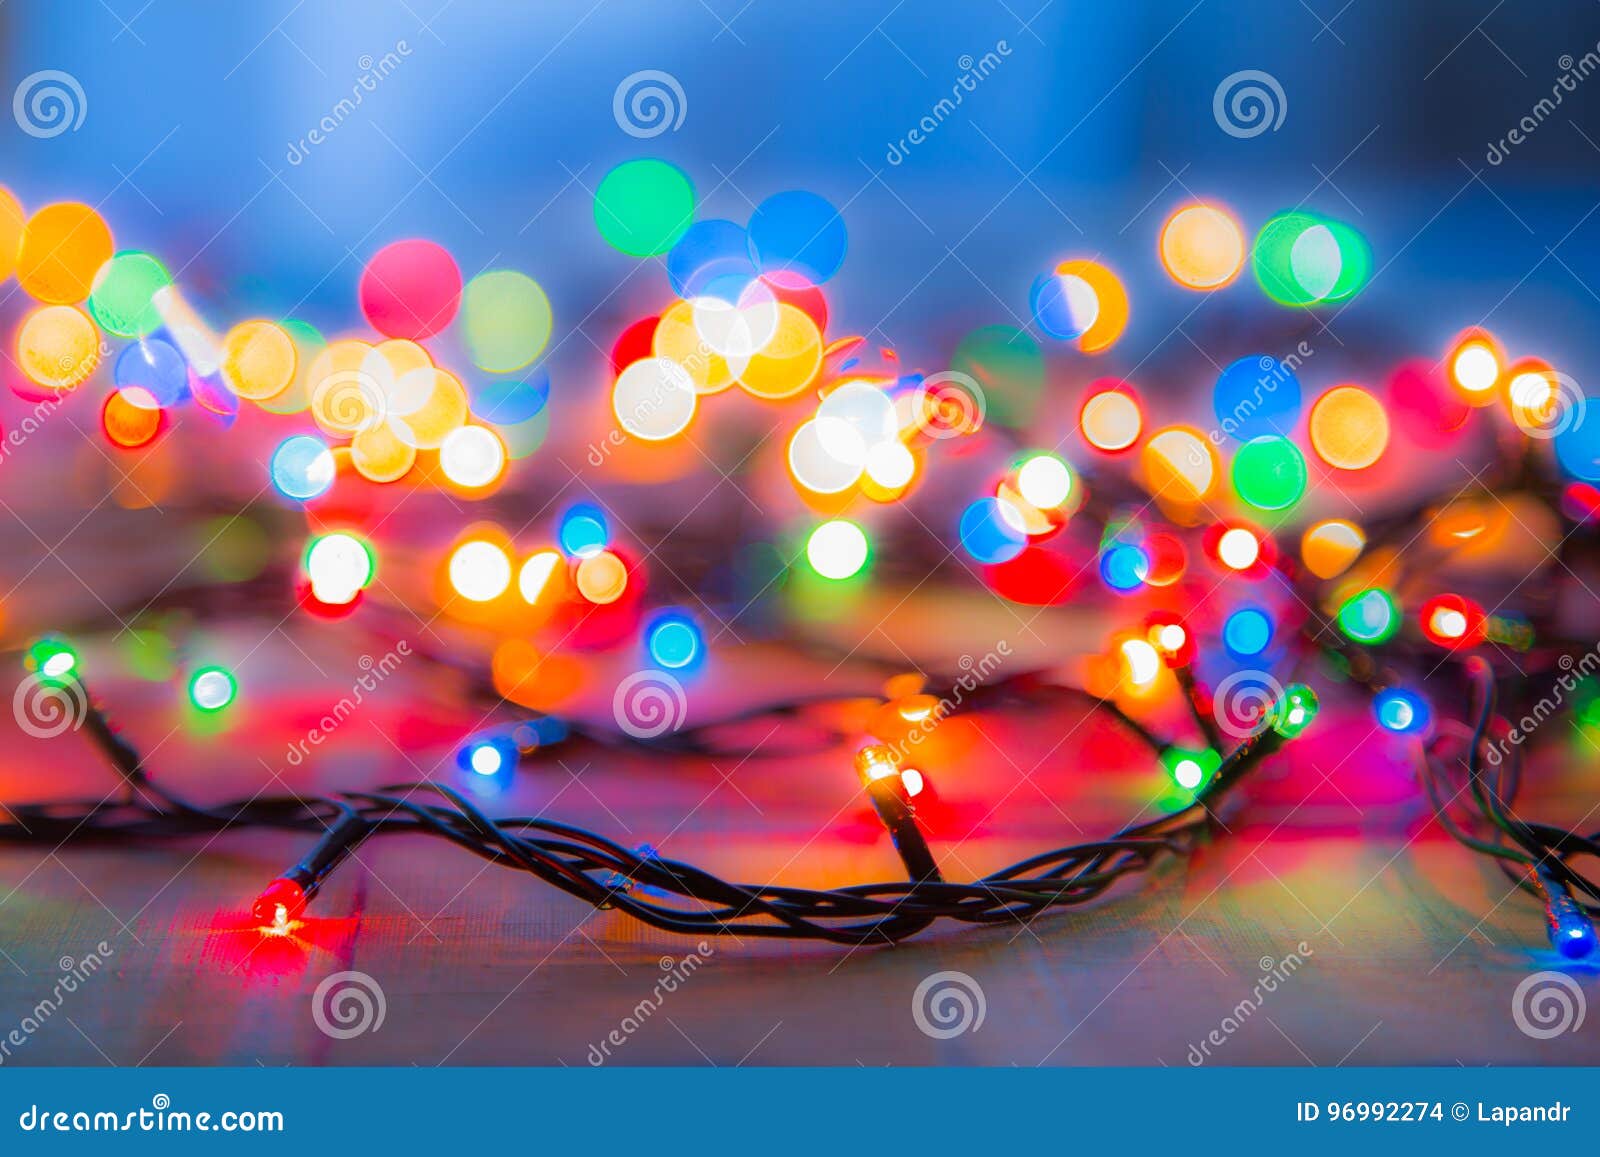 colored lights christmas garlands. colorful abstract background